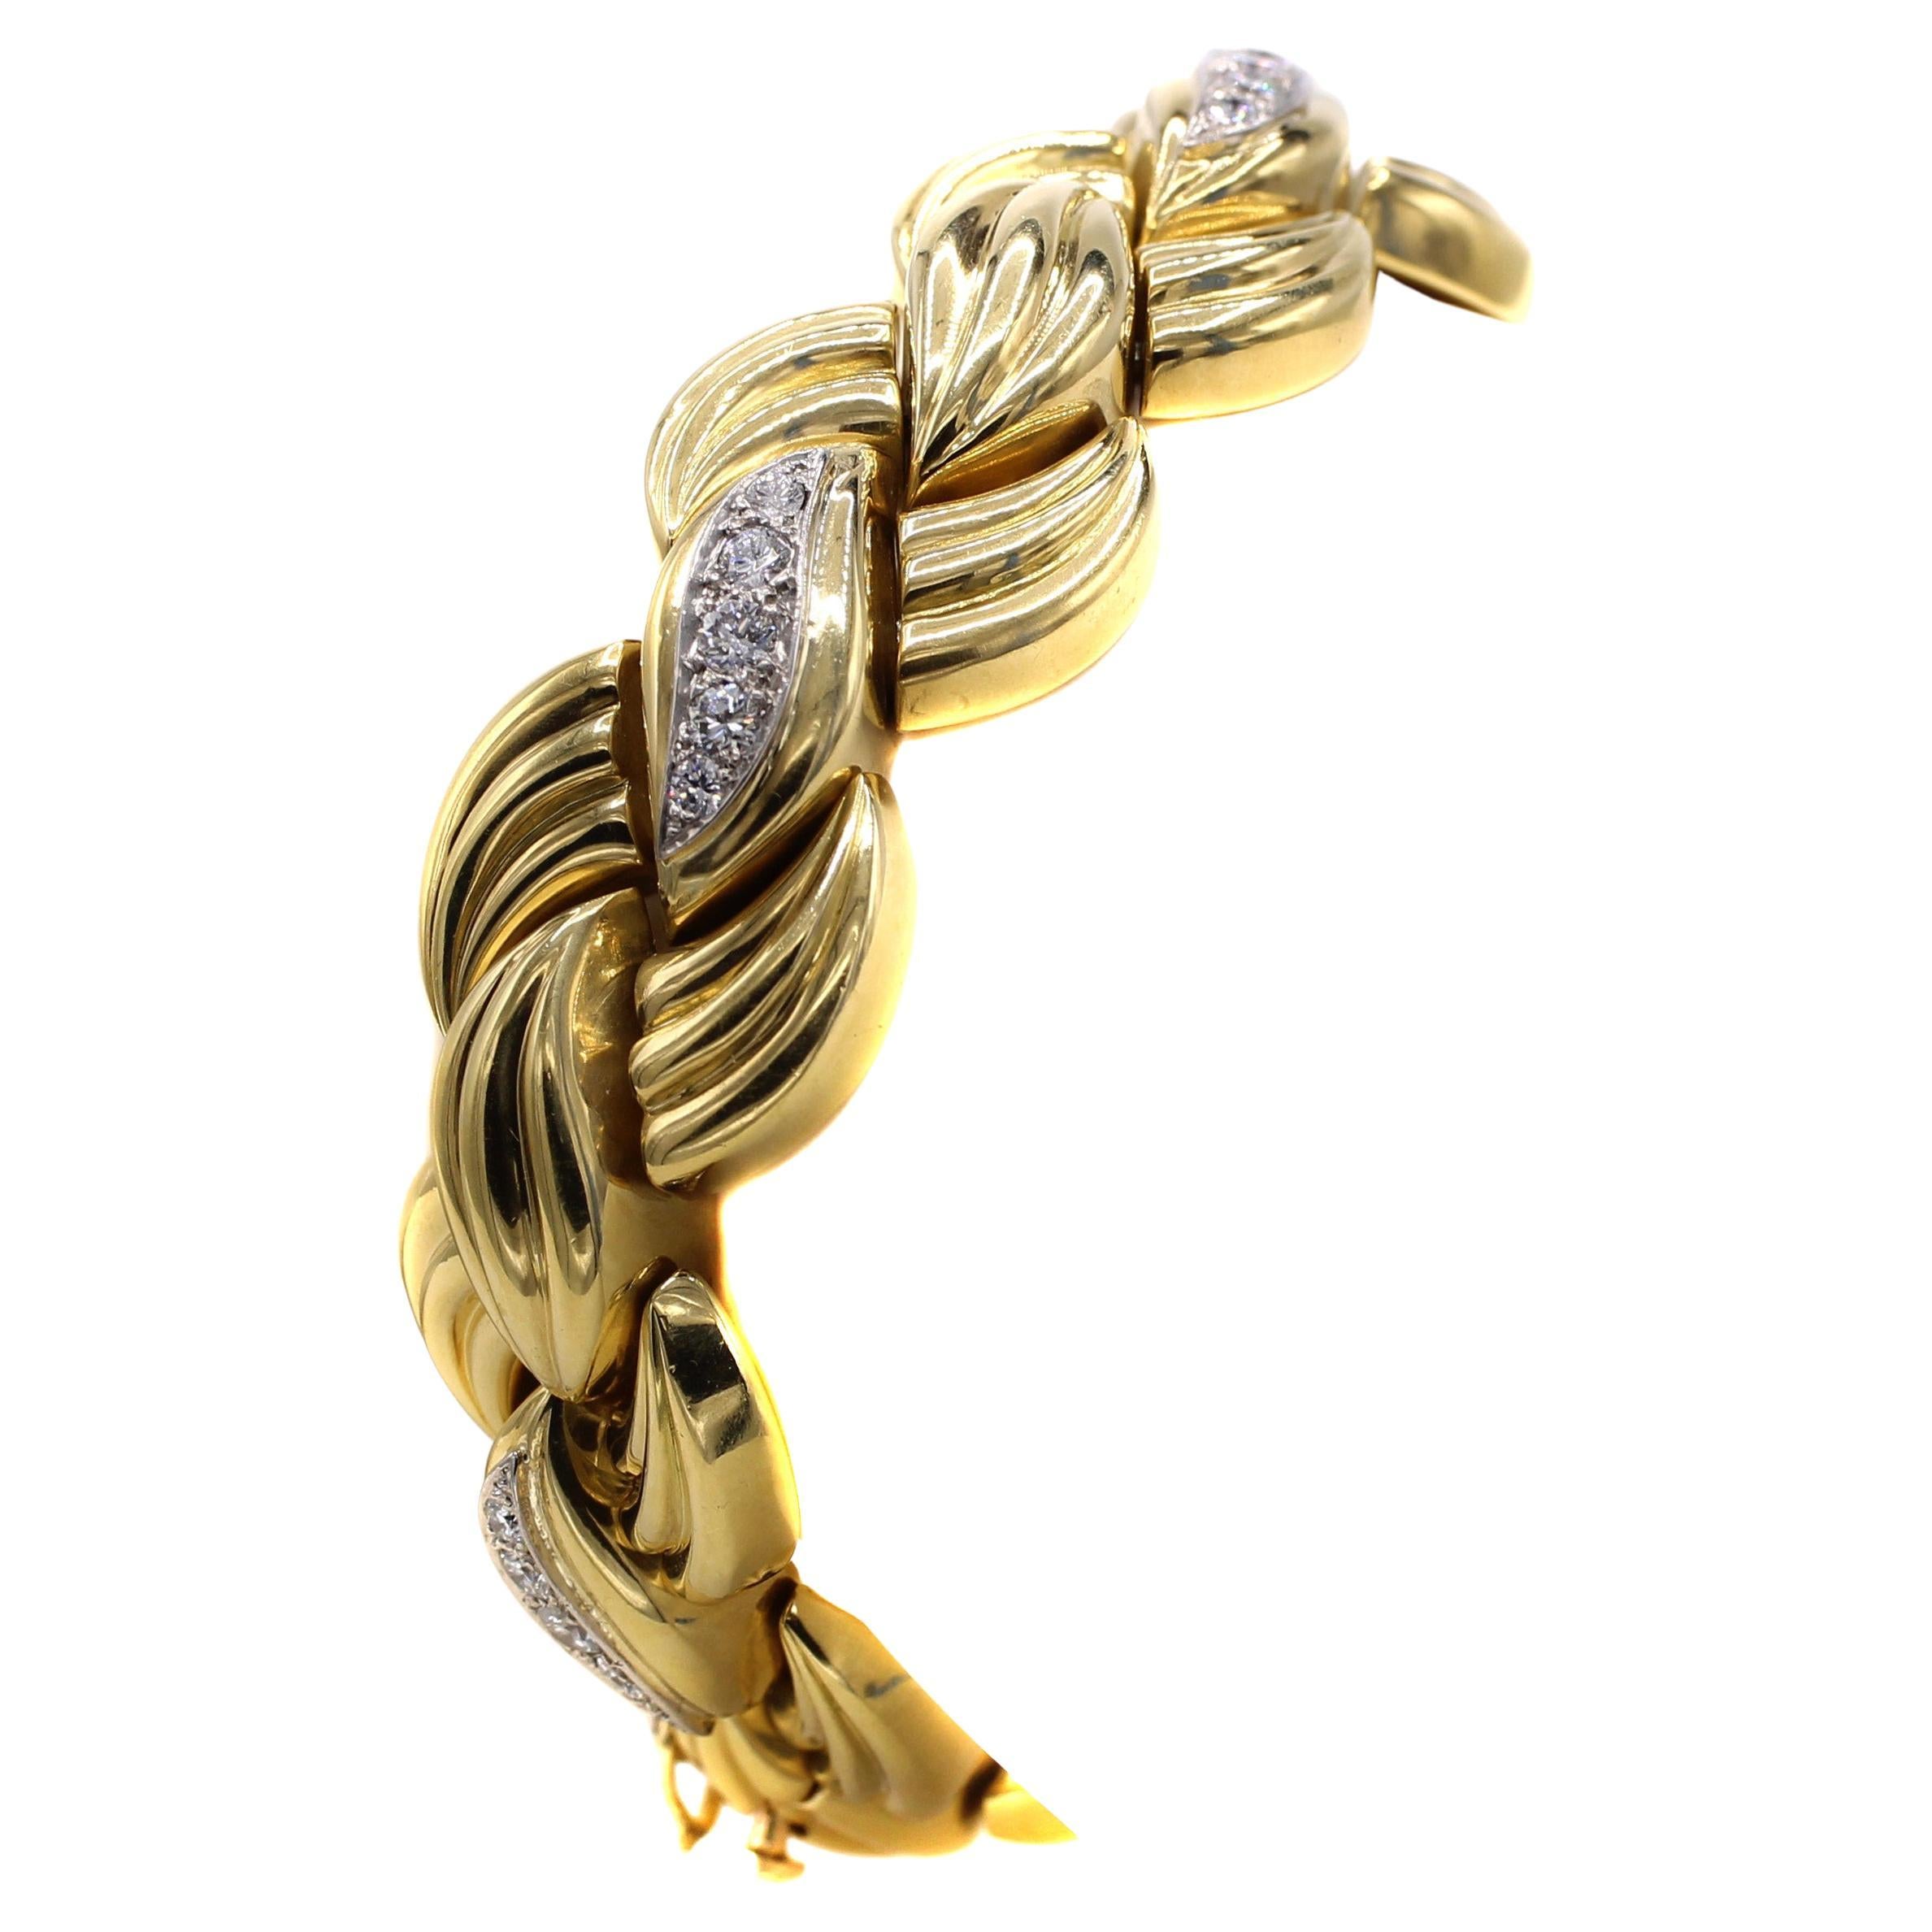 Beautifully designed and masterfully handcrafted in 18 karat yellow gold, 1960s bracelet by Van Cleef & Arpels. Signed Van Cleef & Arpels , numbered
N.Y. 27005. Length 7 inches